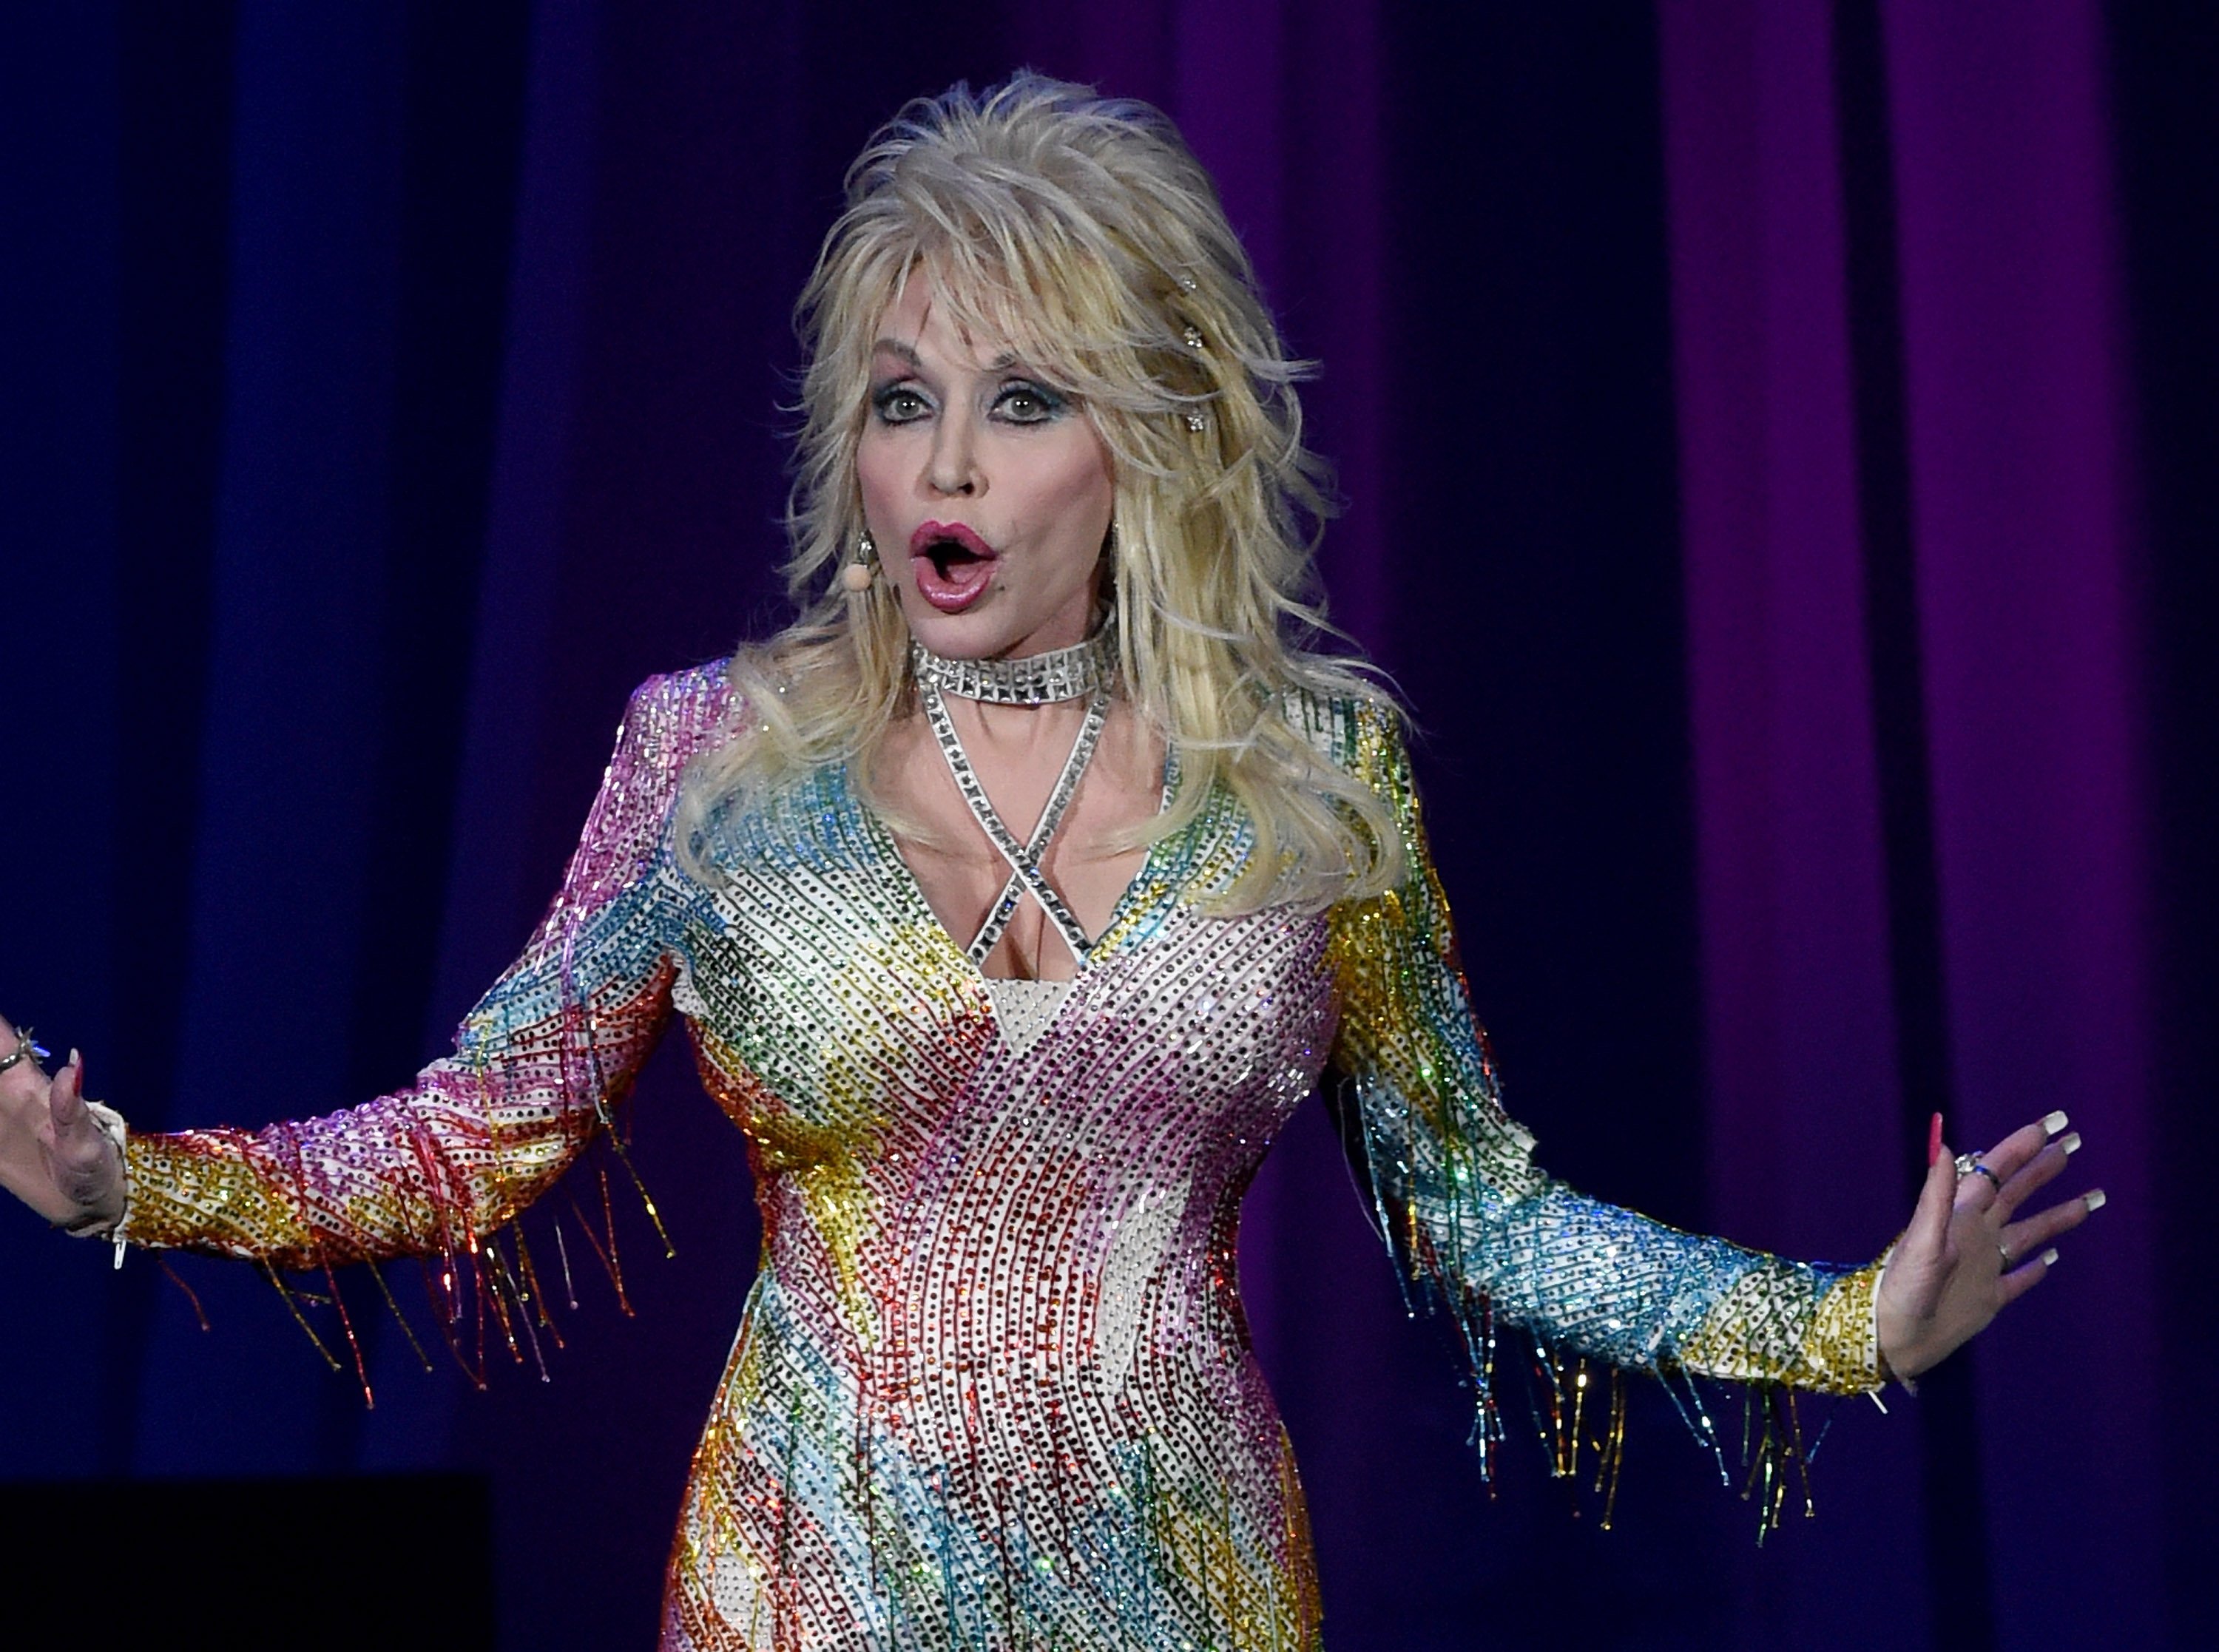 Dolly Parton: Pure & Simple Benefiting The Opry Trust Fund im Ryman Auditorium am 1. August 2015. | Quelle: Getty Images